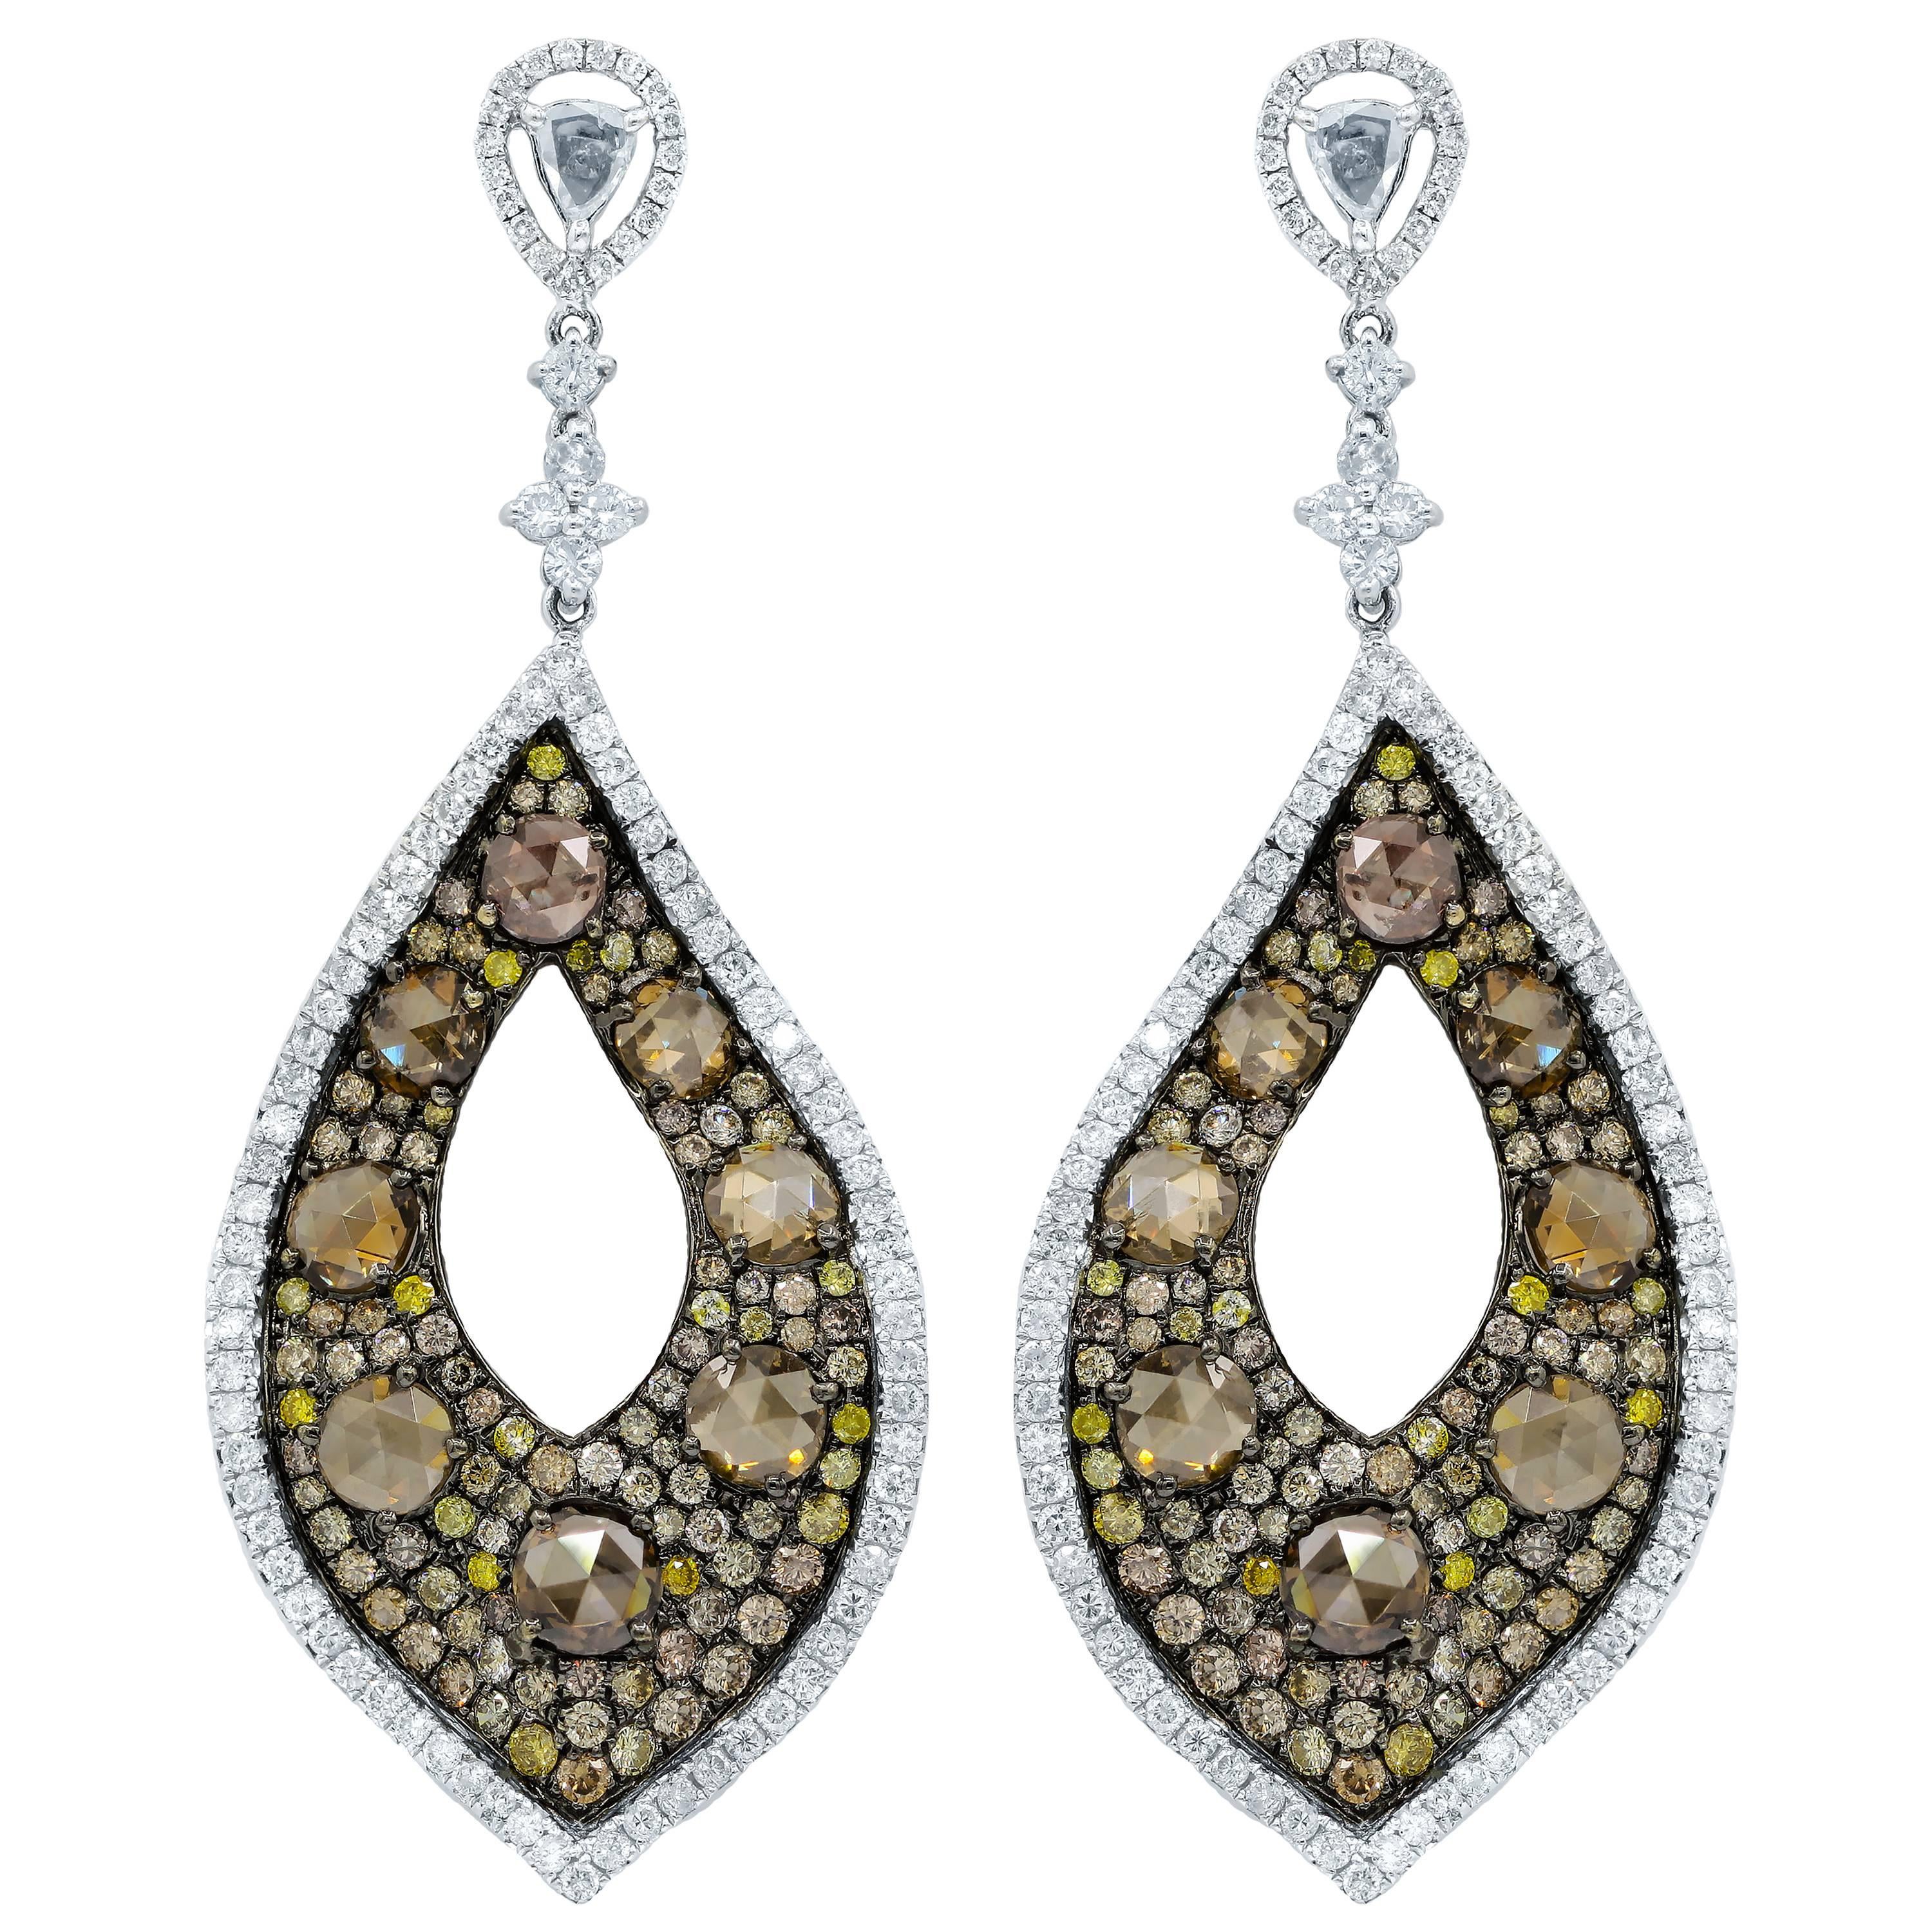 18 Karat White Gold and Colored Diamond Earrings